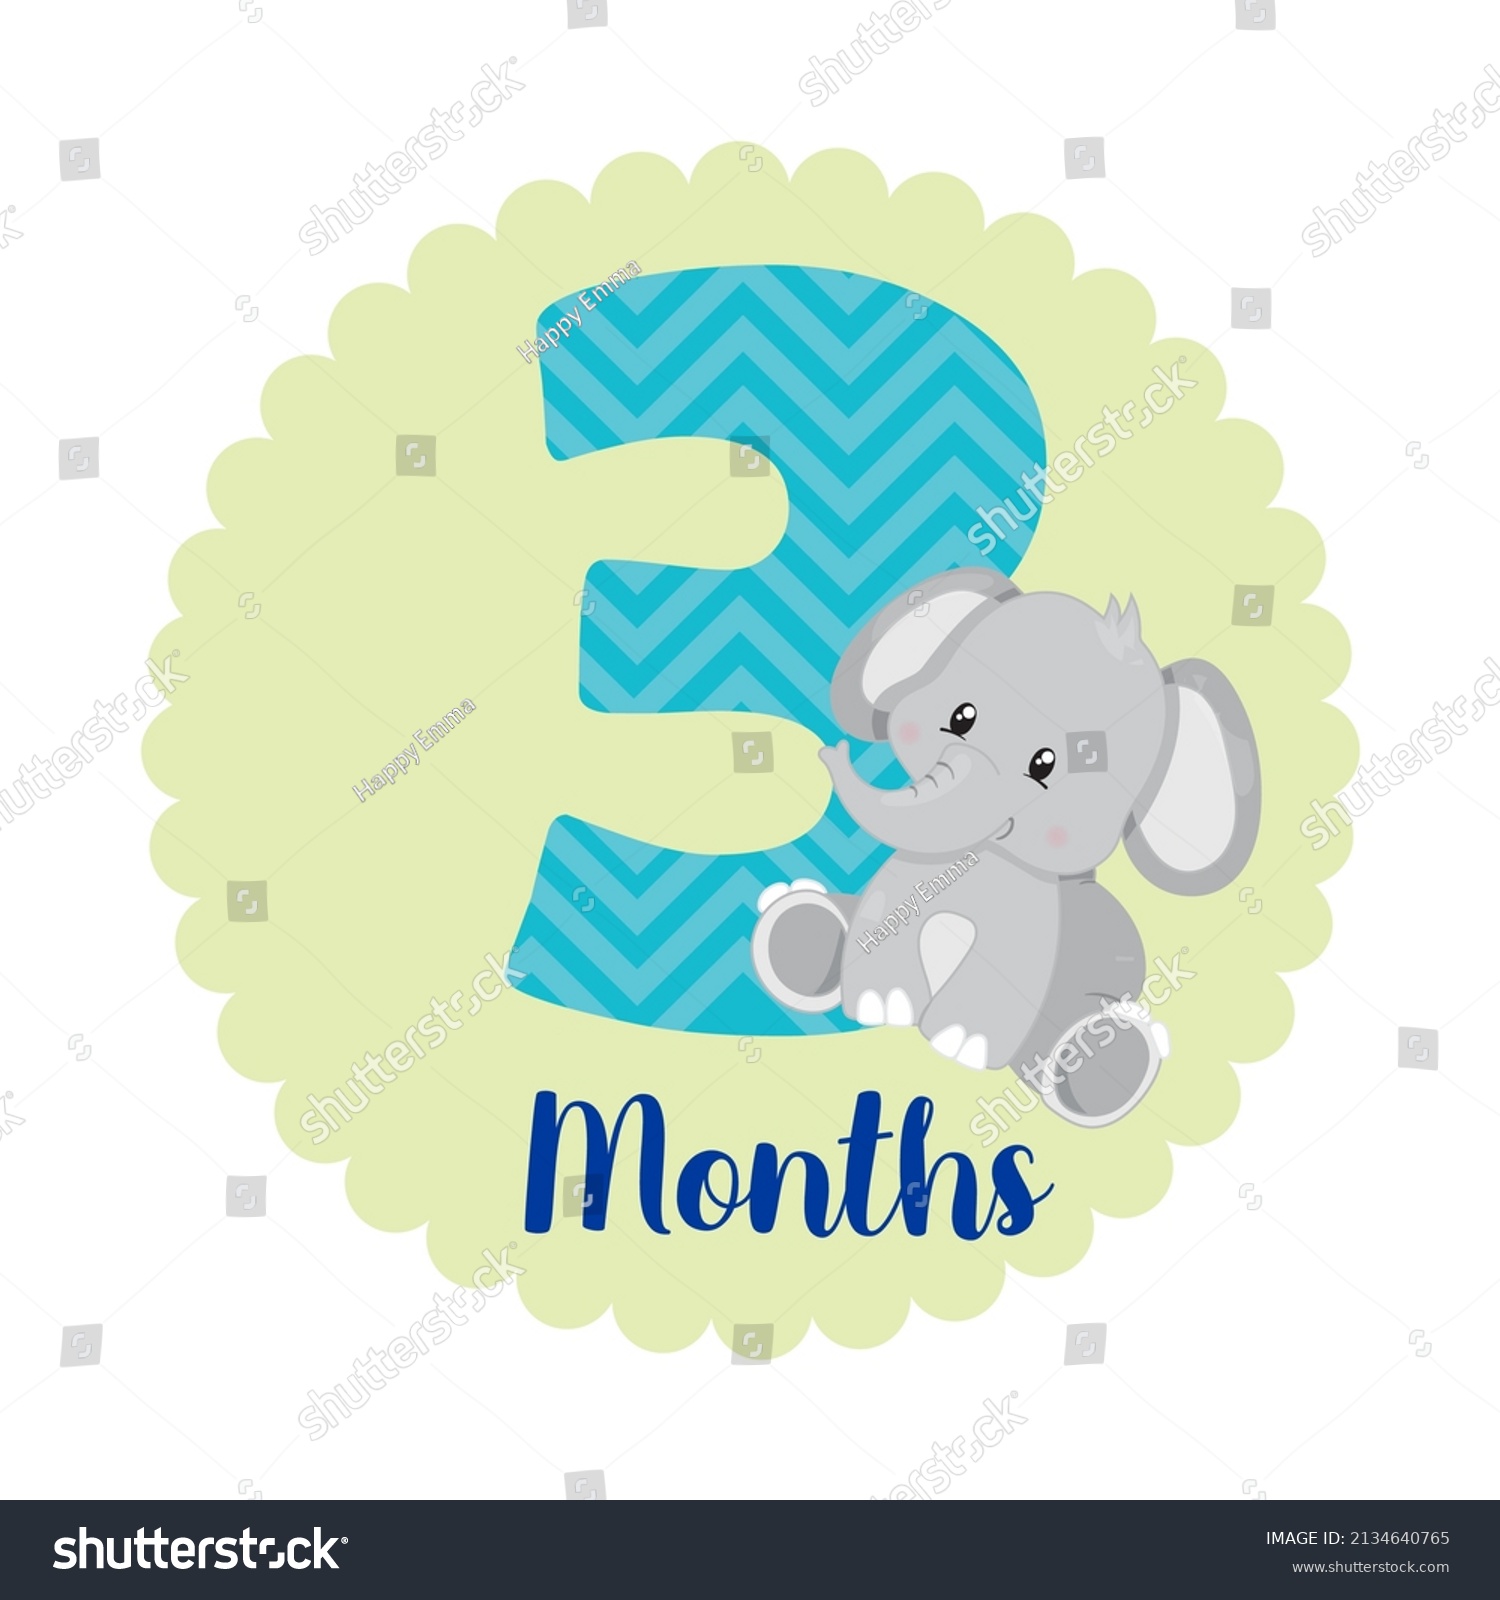 104 3 months old baby Stock Illustrations, Images & Vectors | Shutterstock